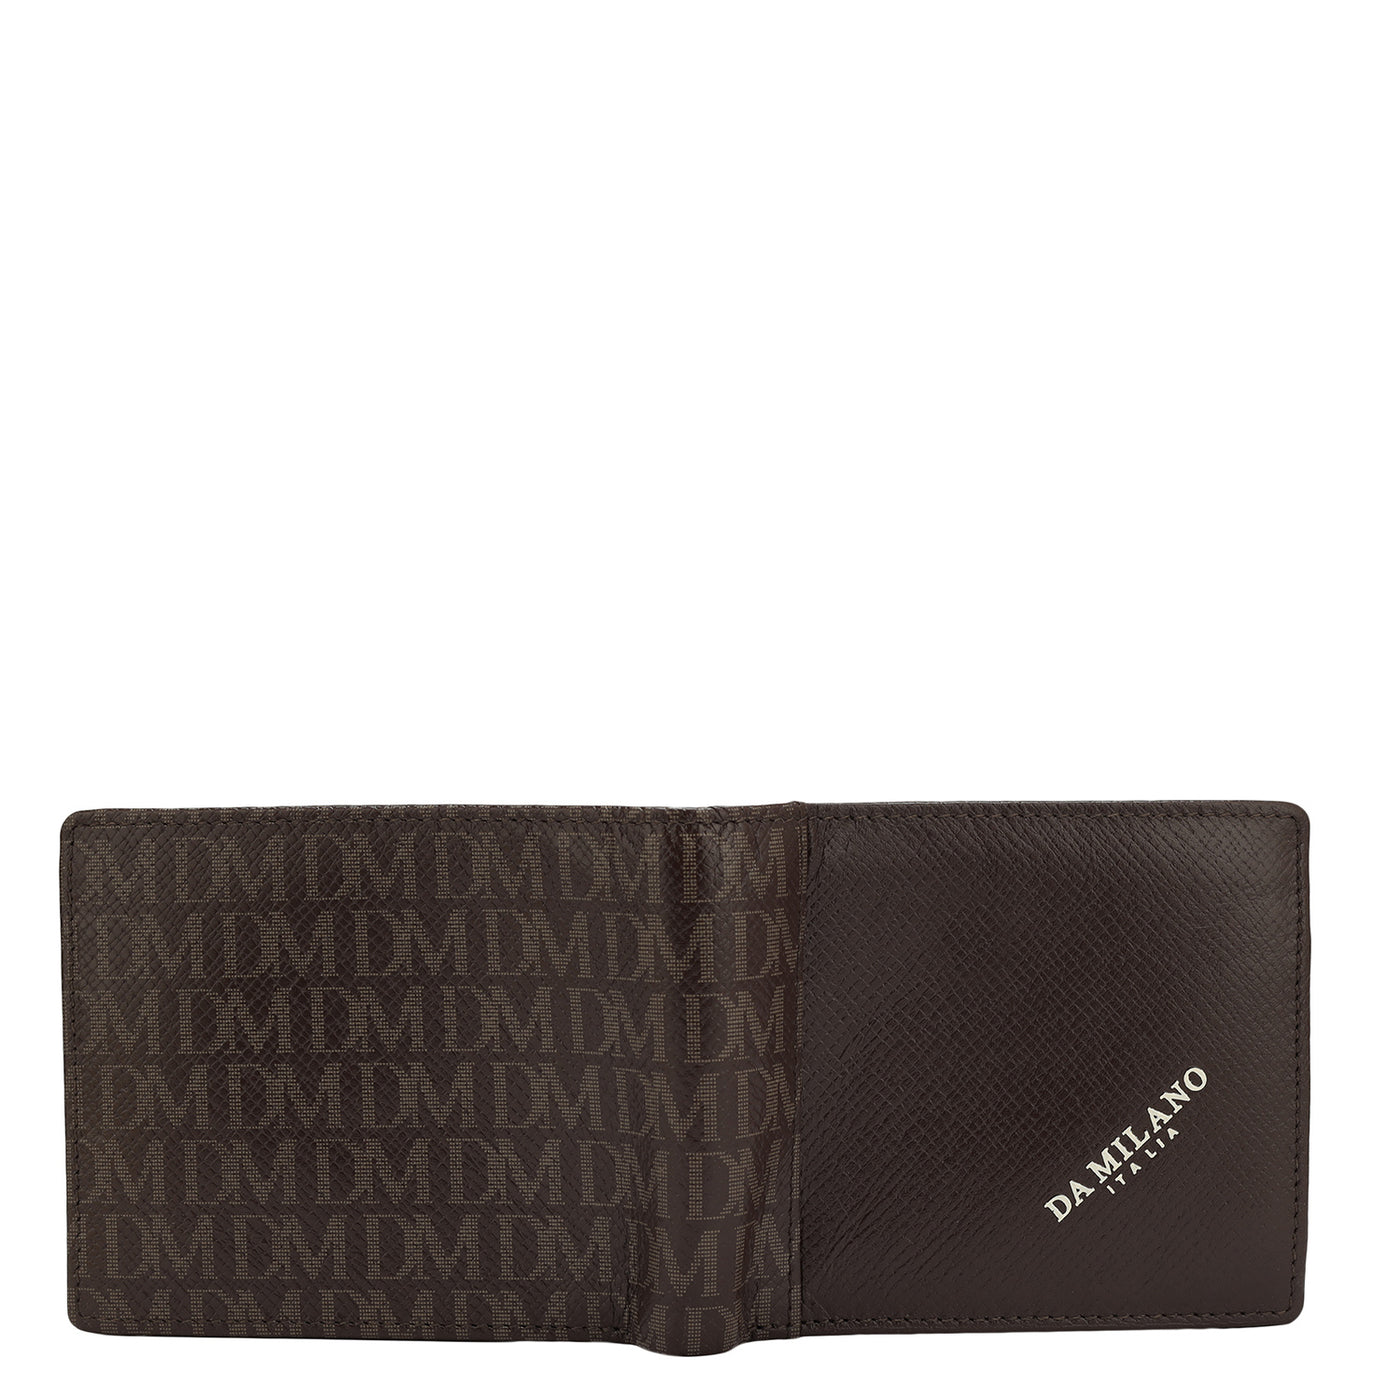 Franzy Monogram Leather Mens Wallet - Chocolate